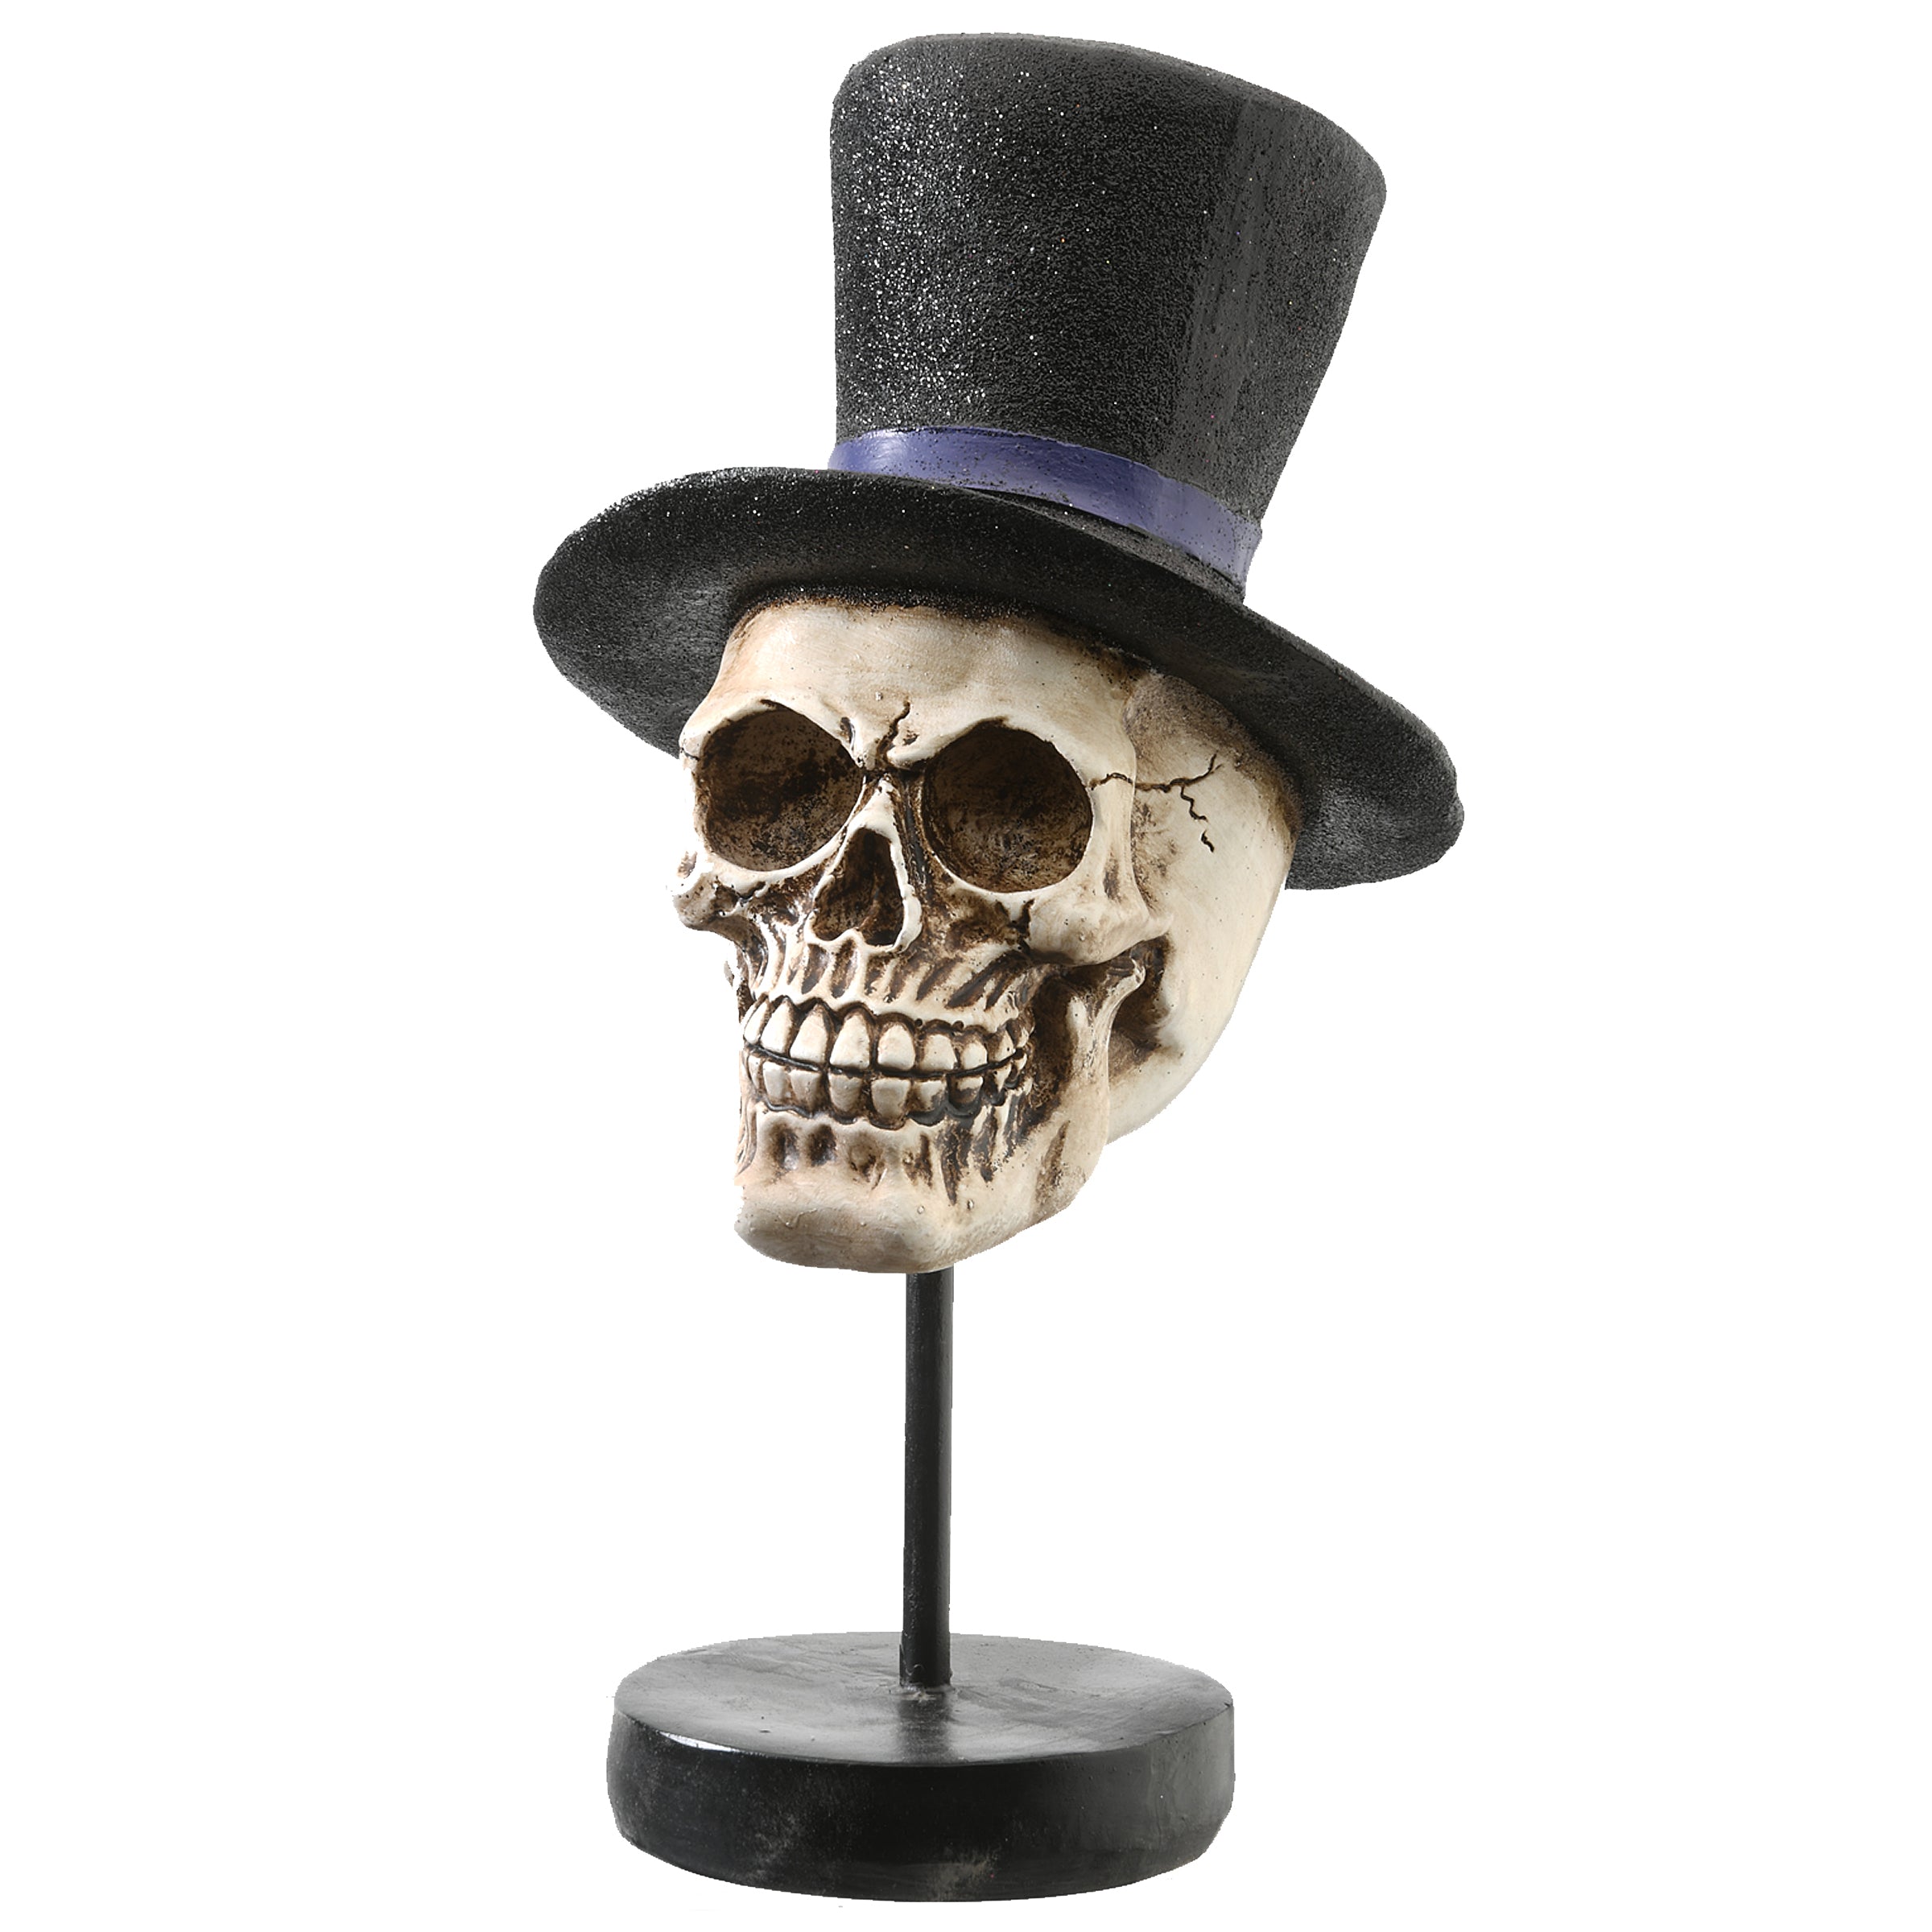 Halloween Skull in Top Hat Table Decoration, 12 Inches